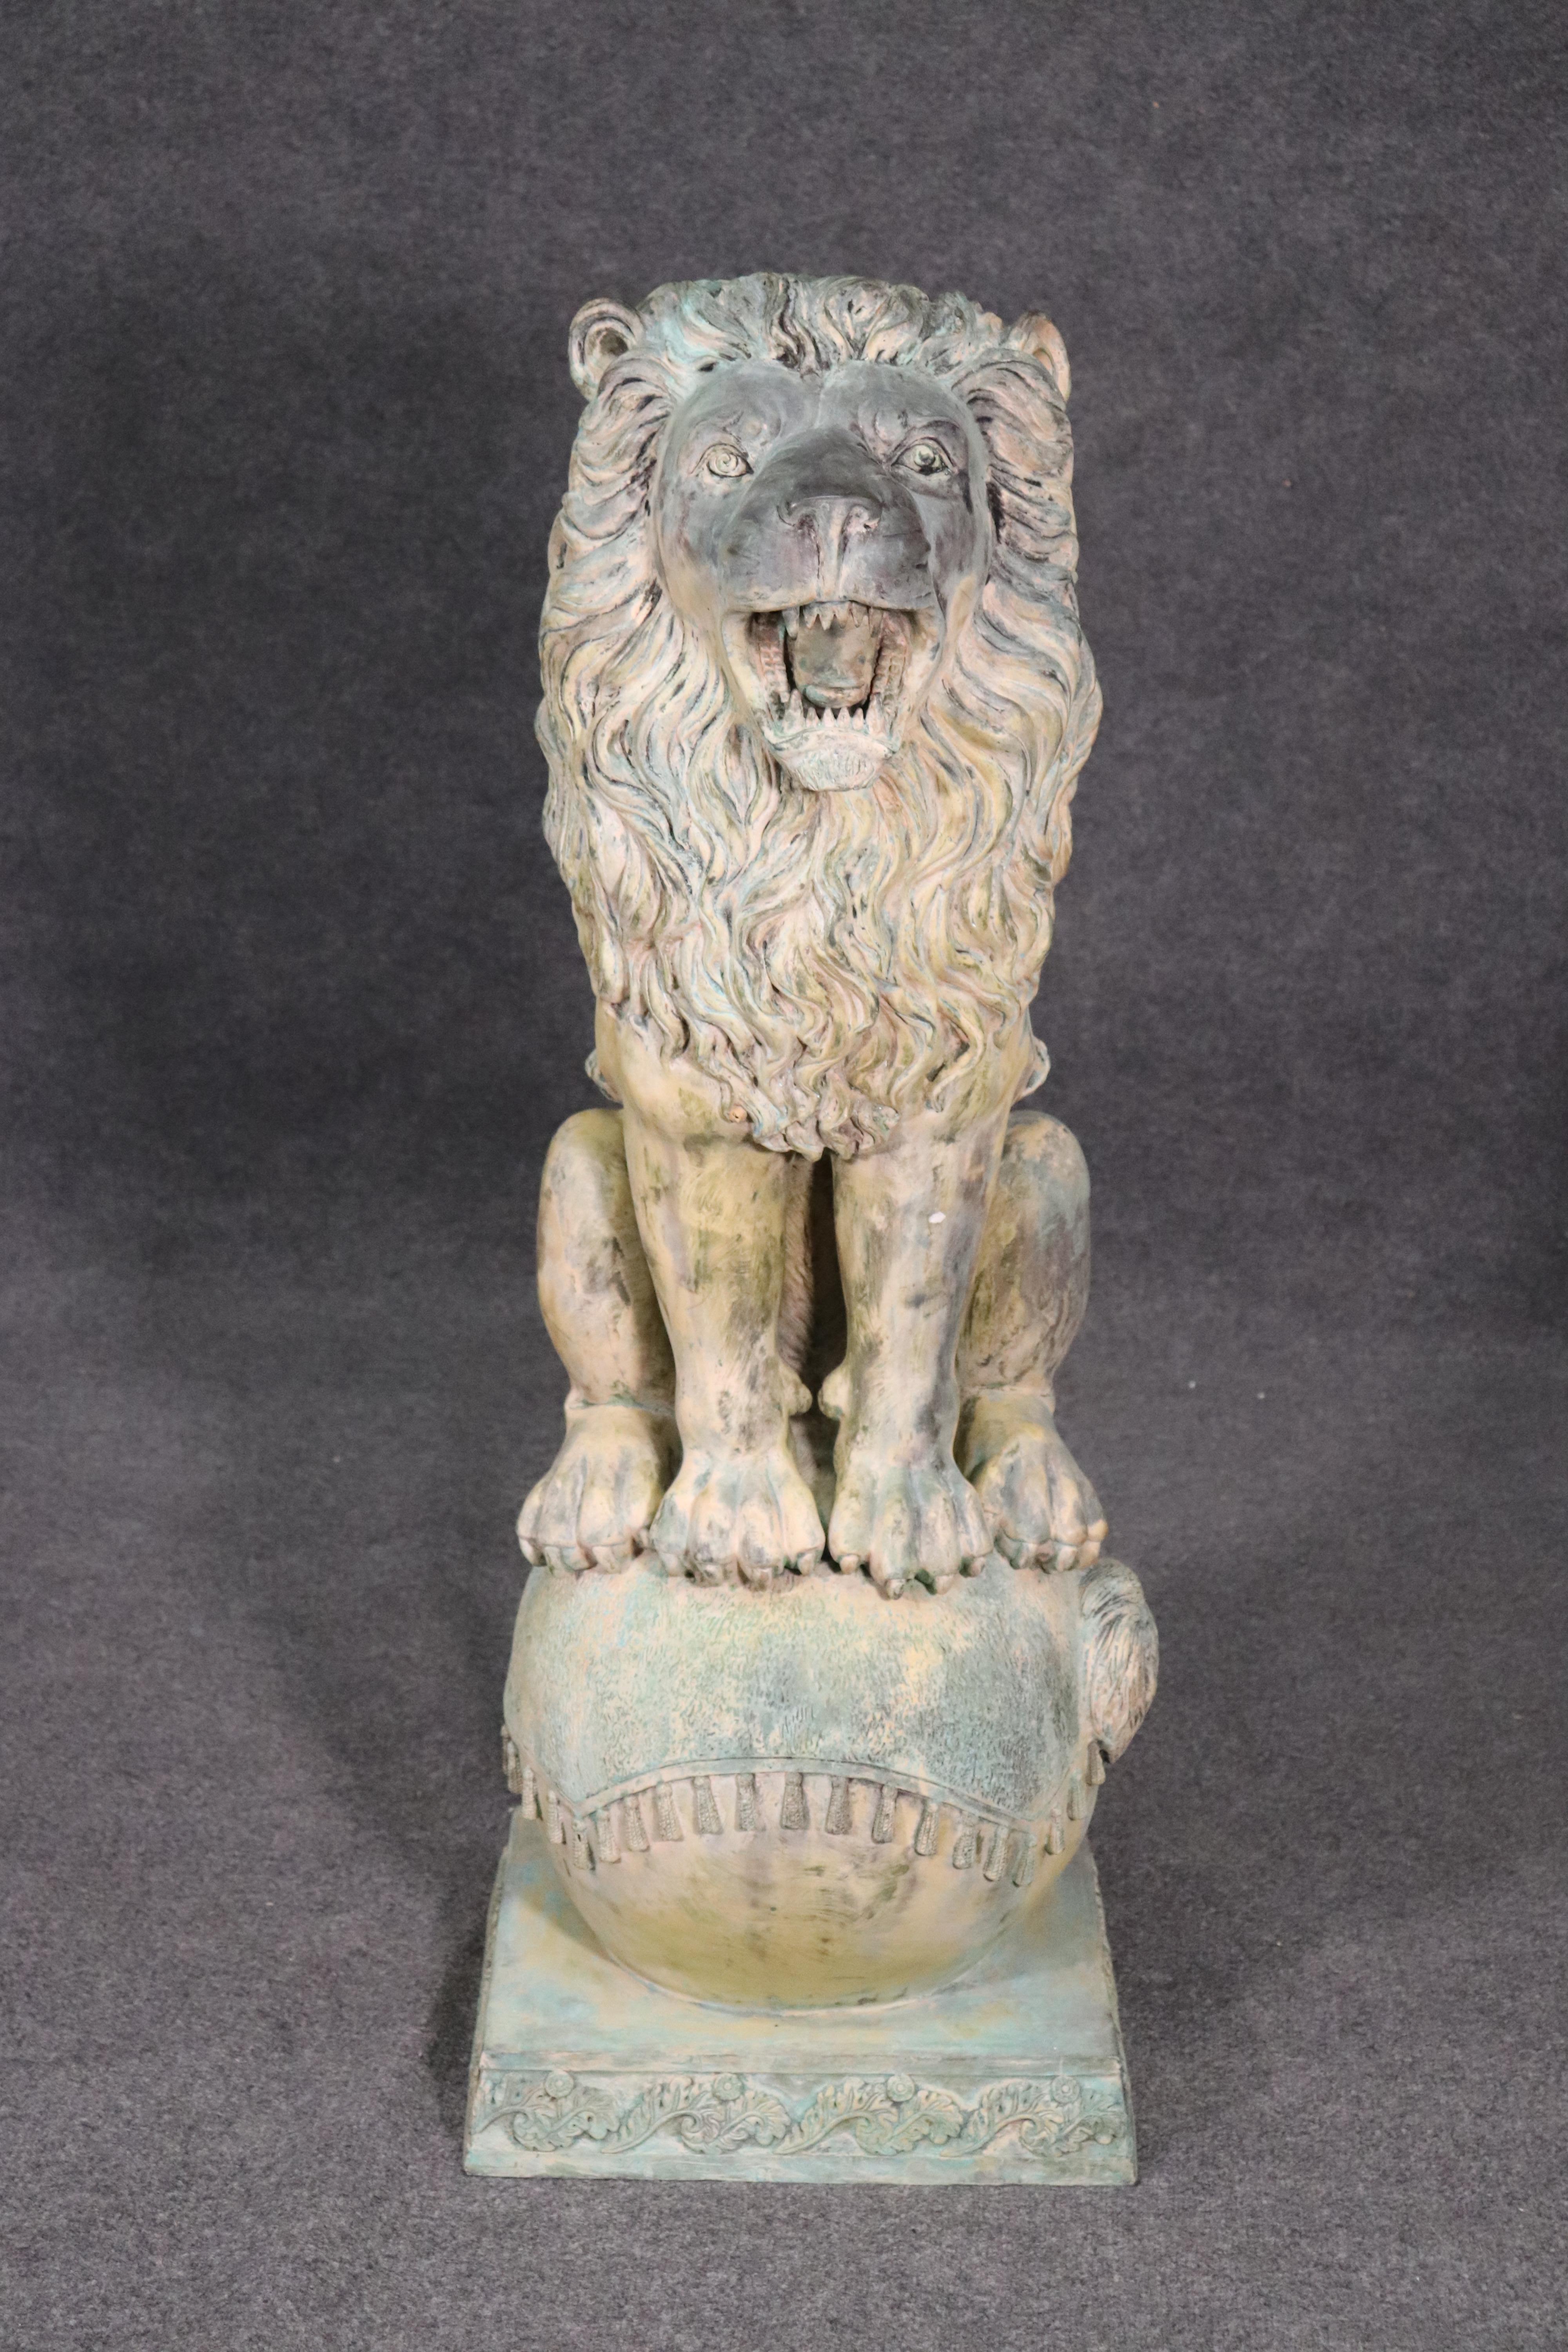 This is a very realistic standing lion bronze lion, circa 1920. The lion stands with his mouth agape and atop a decorated ball. He will protect your home or garden with pride. The lion measures 49 tall x 18 wide x 19 deep.